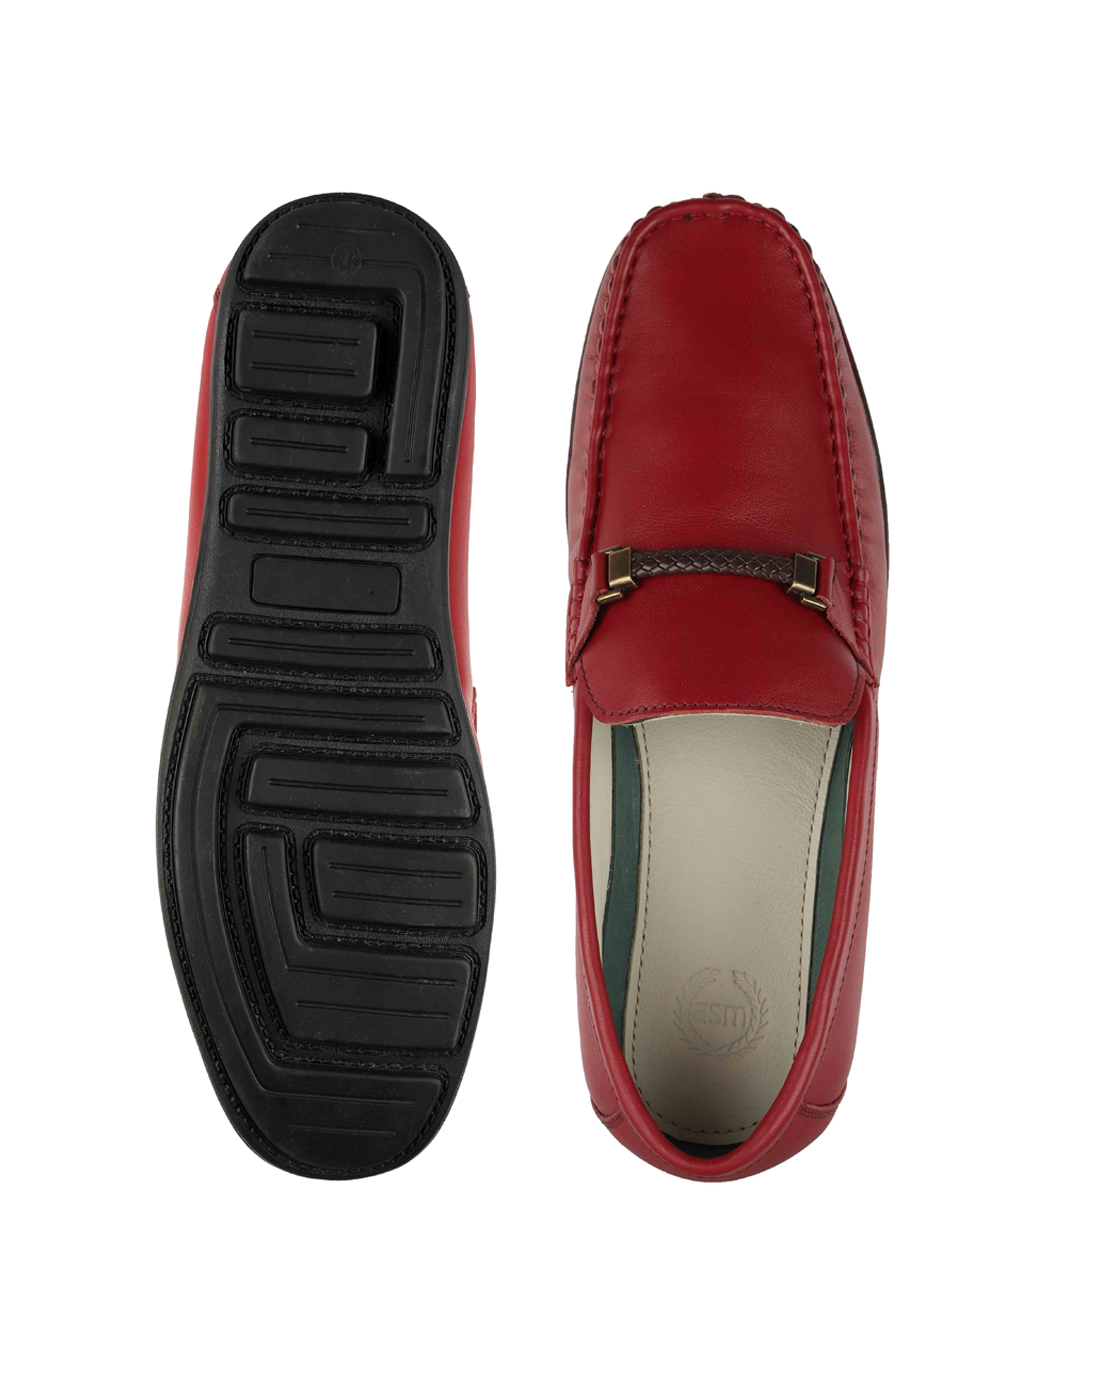 Cherry Red Loafers - Buy Red Pure Leather Loafers @ Rs.1800 Only